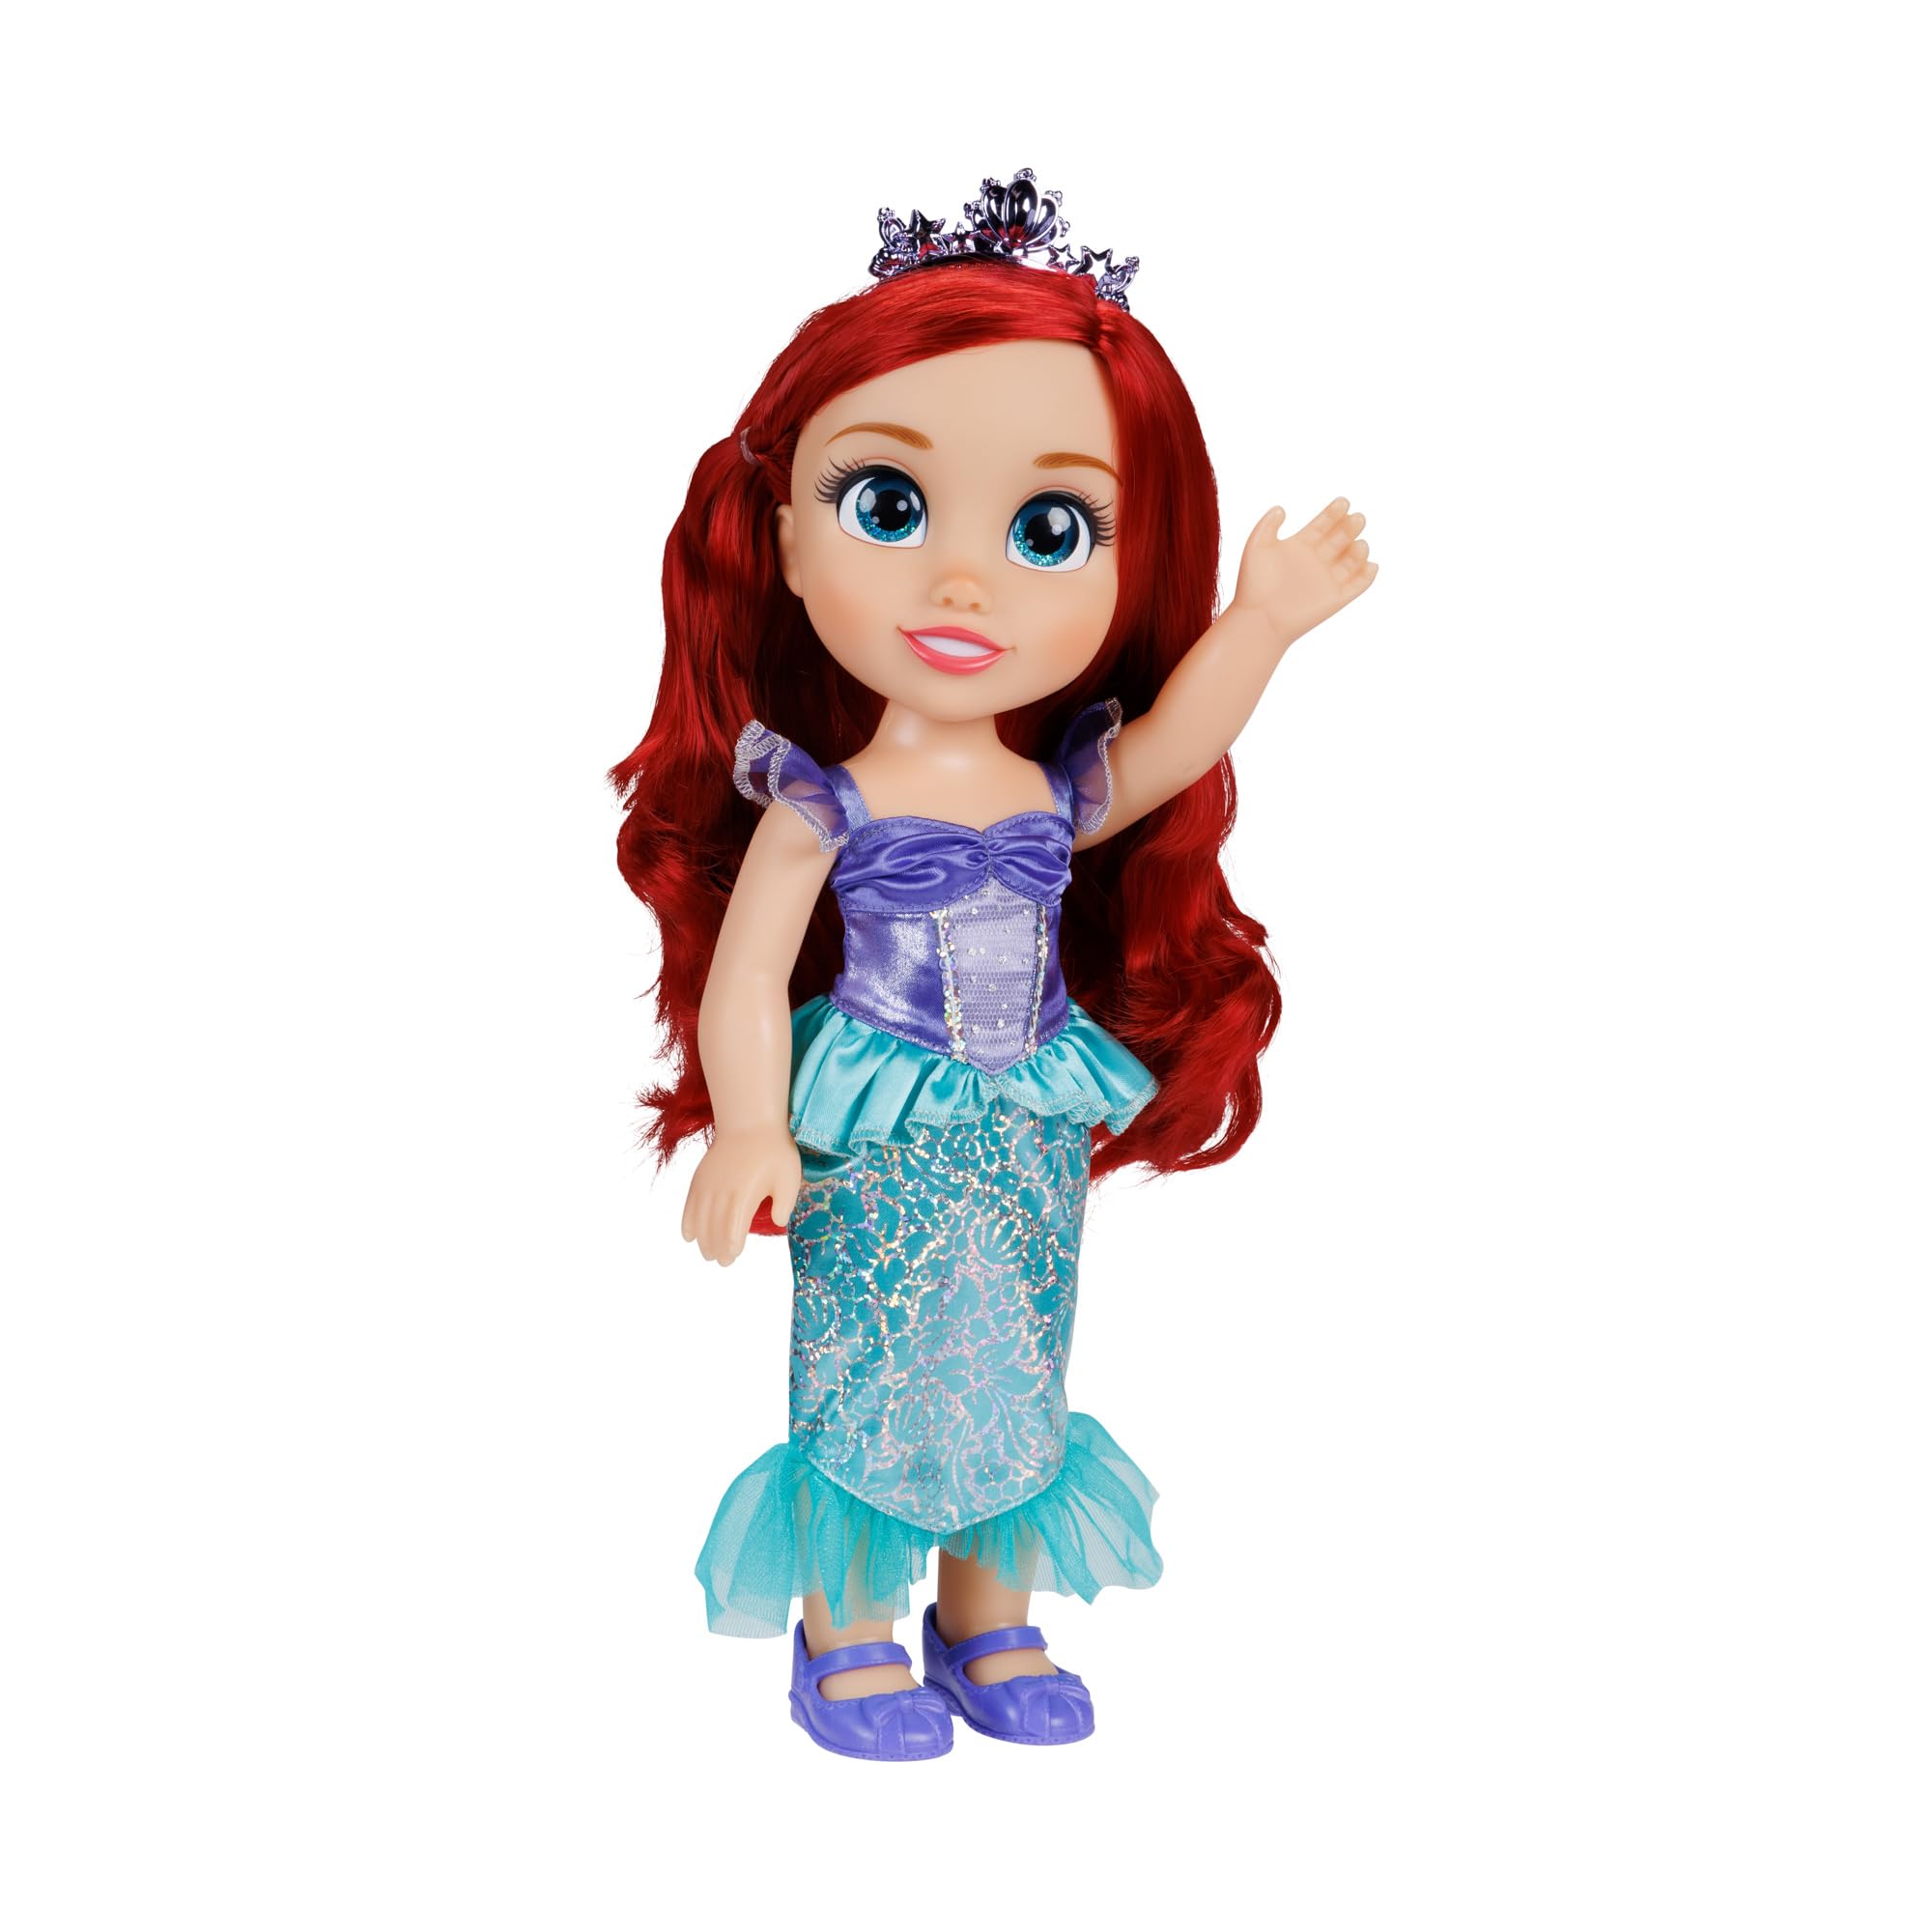 Disney Princess D100 My Friend Ariel Doll 14 inch Tall Includes Removable Outfit, Tiara, Shoes & Brush